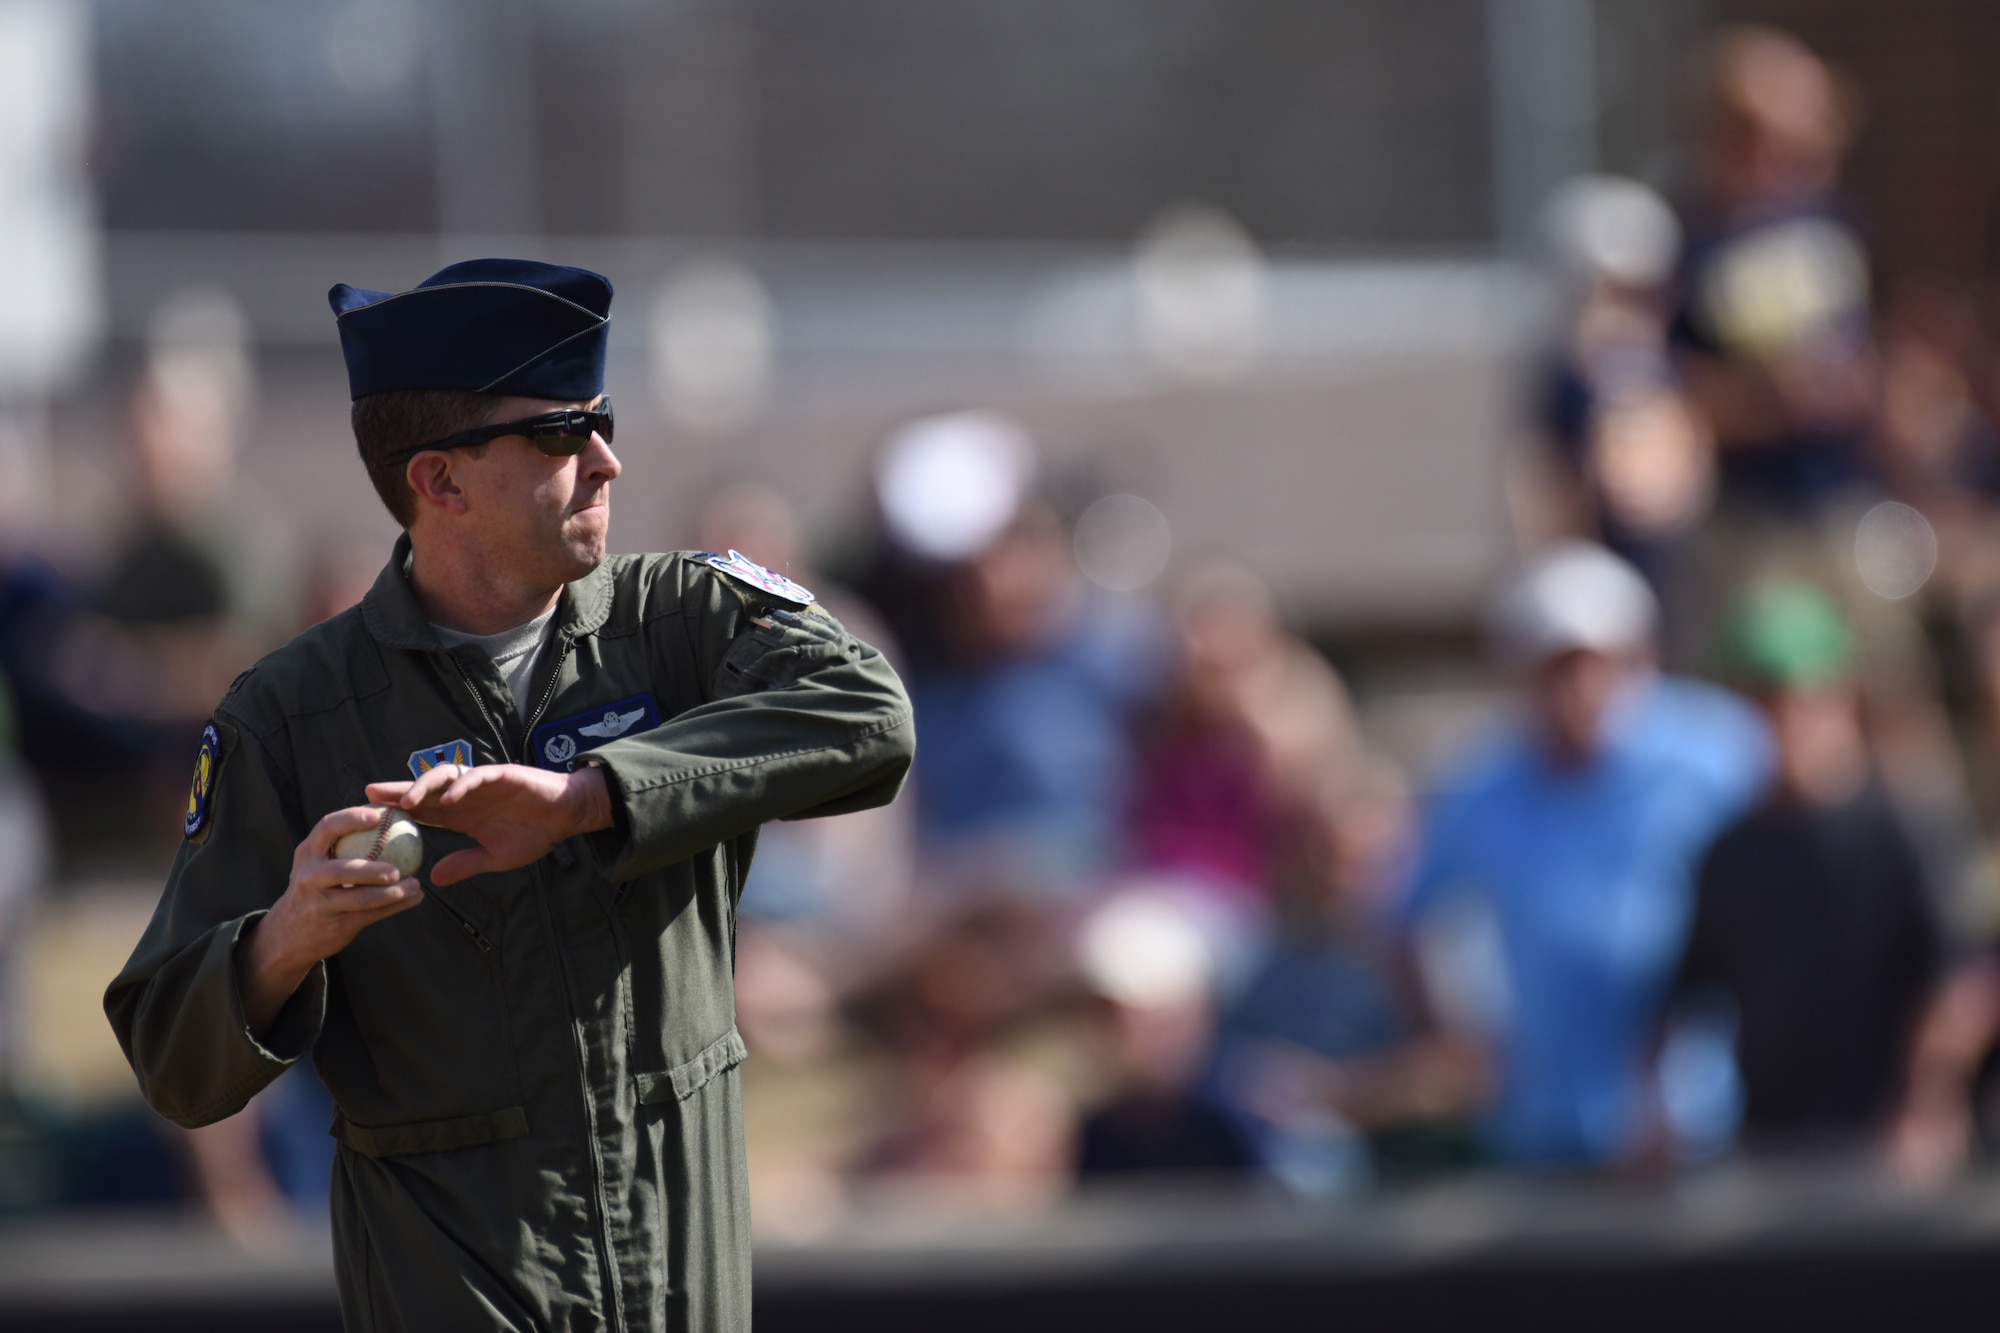 Col. Christopher Sage, 4th Fighter Wing commander throws out the first pitch during the Freedom Classic, Feb. 25, 2017 at Grainger Stadium in Kinston, North Carolina.  Though the Navy had their bases loaded late in the game, the Falcons shot out their potential to score with inning-ending double plays; winning the series. (U.S. Air Force photo by Airman 1st Class Victoria Boyton)